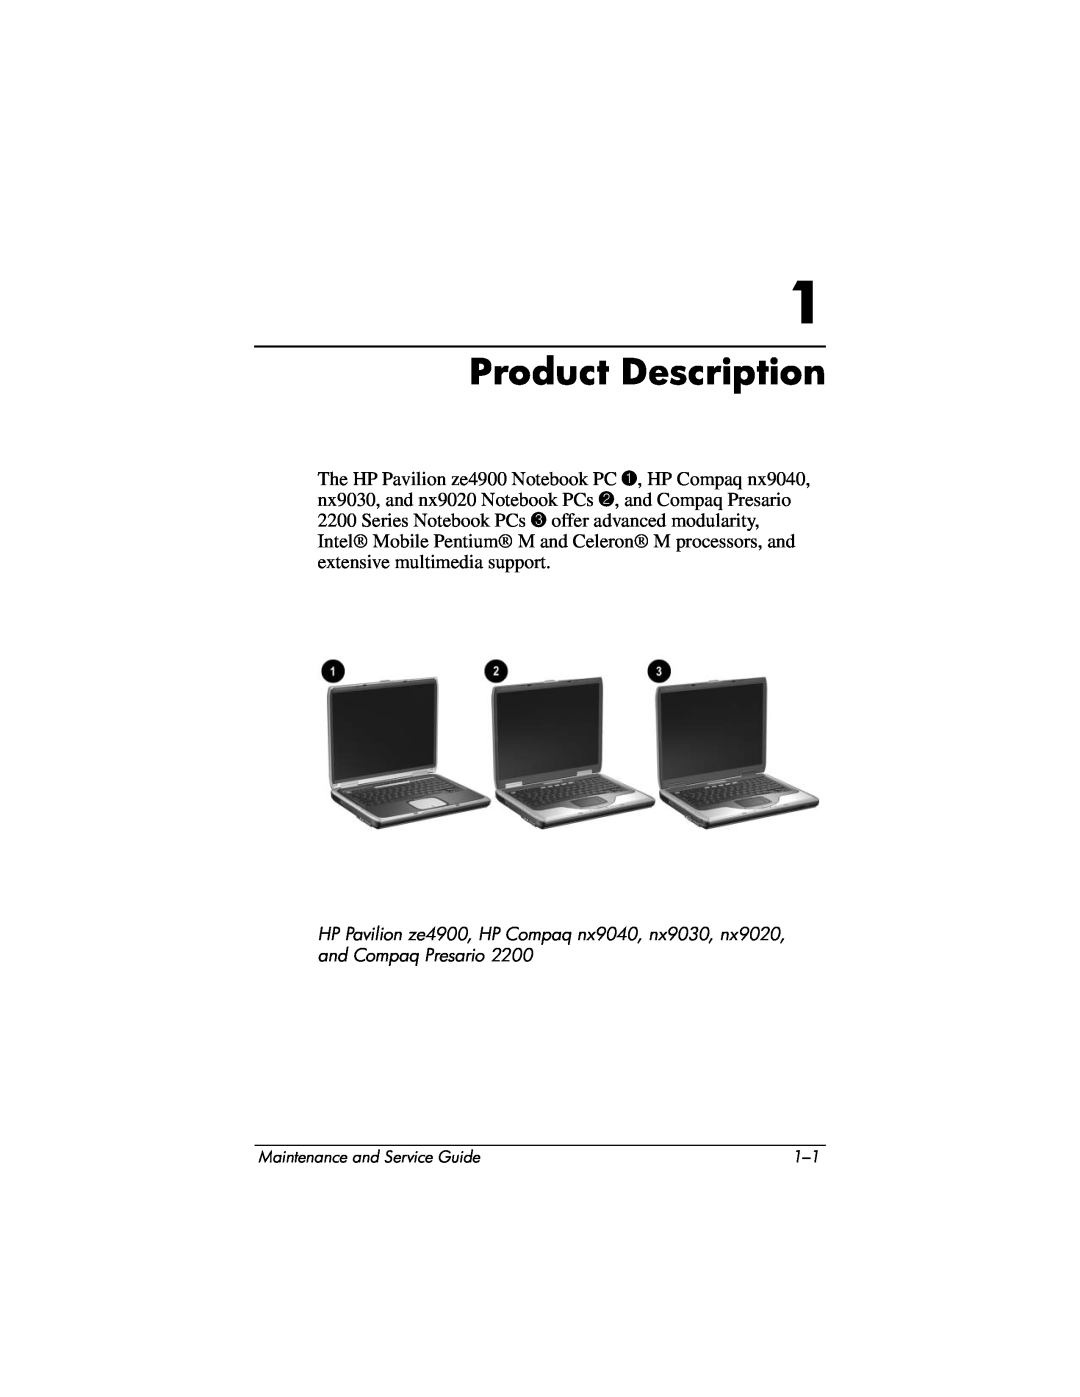 HP NX9020, NX9040, NX9030, ZE4900 manual Product Description, Maintenance and Service Guide 